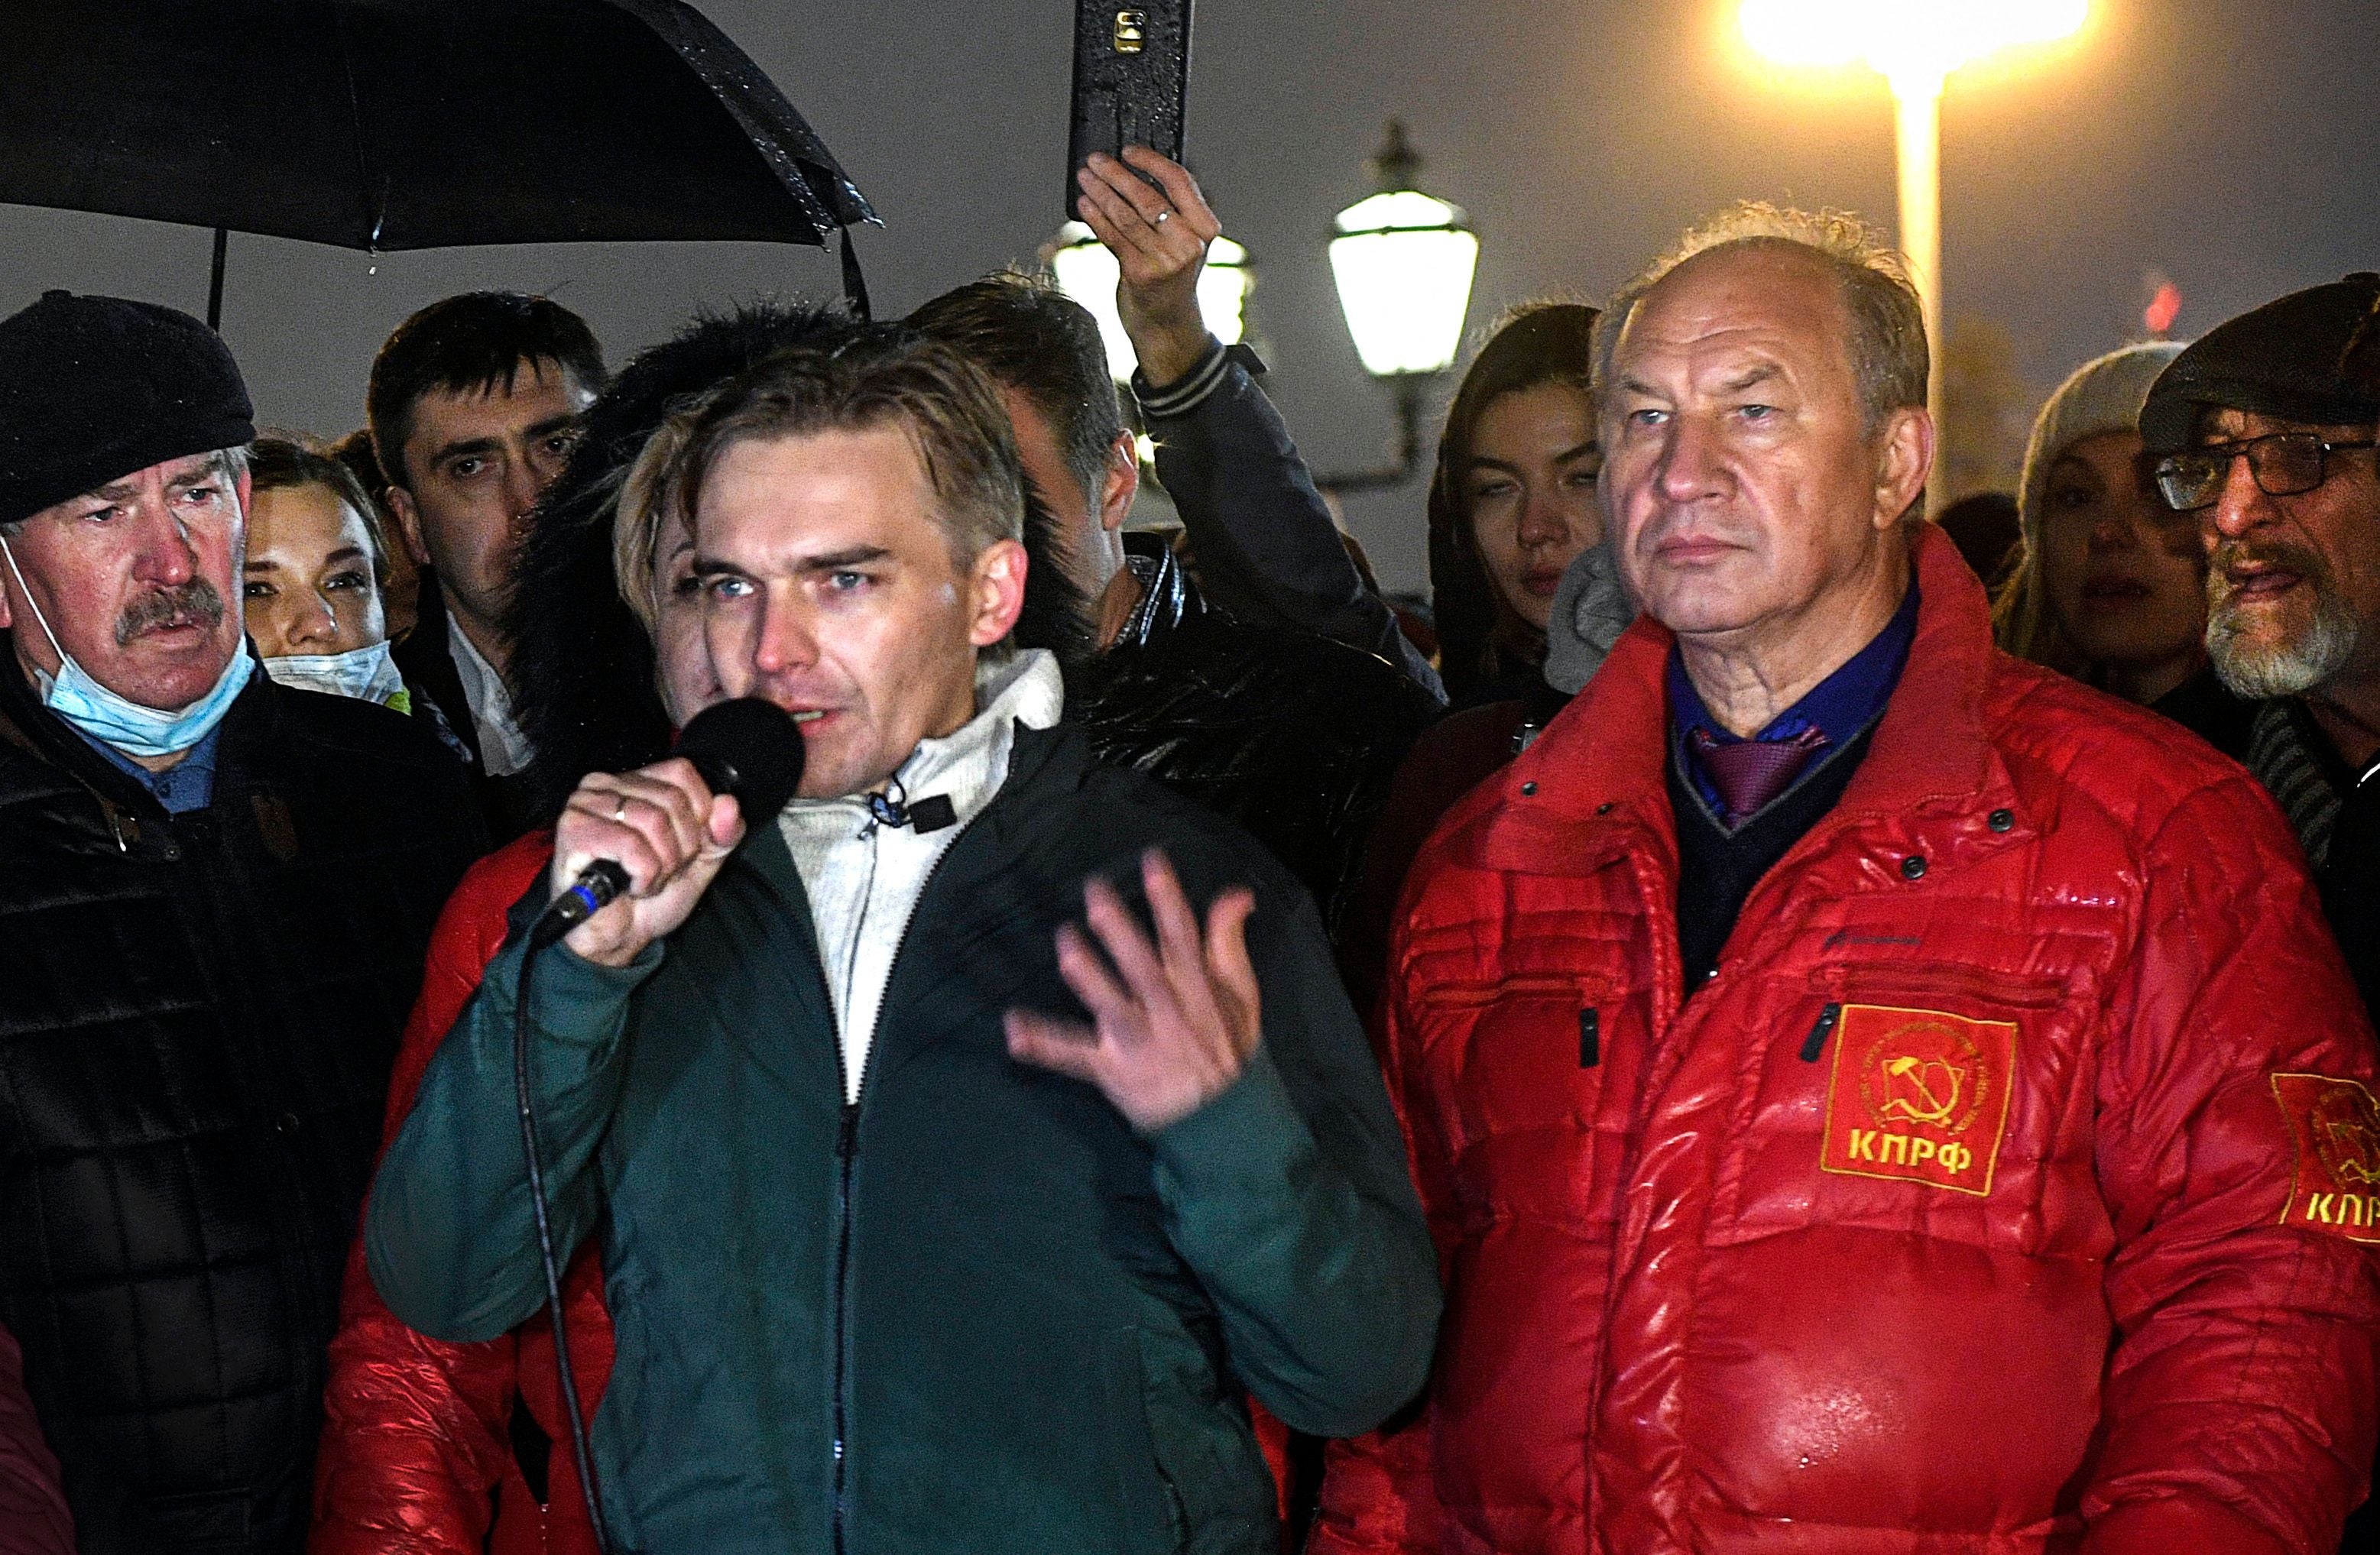 Communist candidate Mikhail Lobanov speaks at Sunday night’s protest in Moscow.